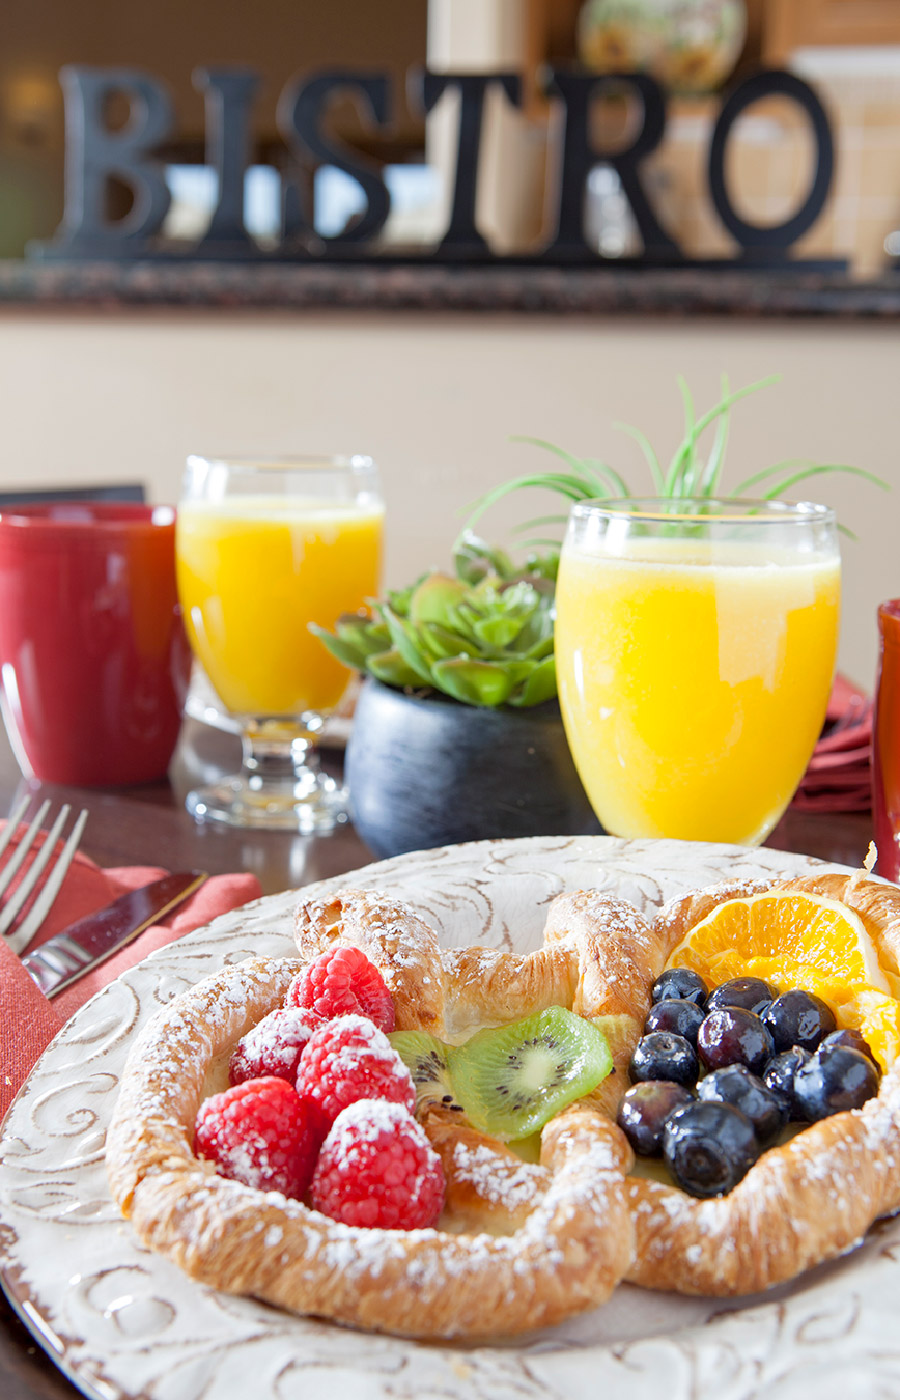 A welcoming breakfast made of fruit pastry and orange juice in champagne glasses